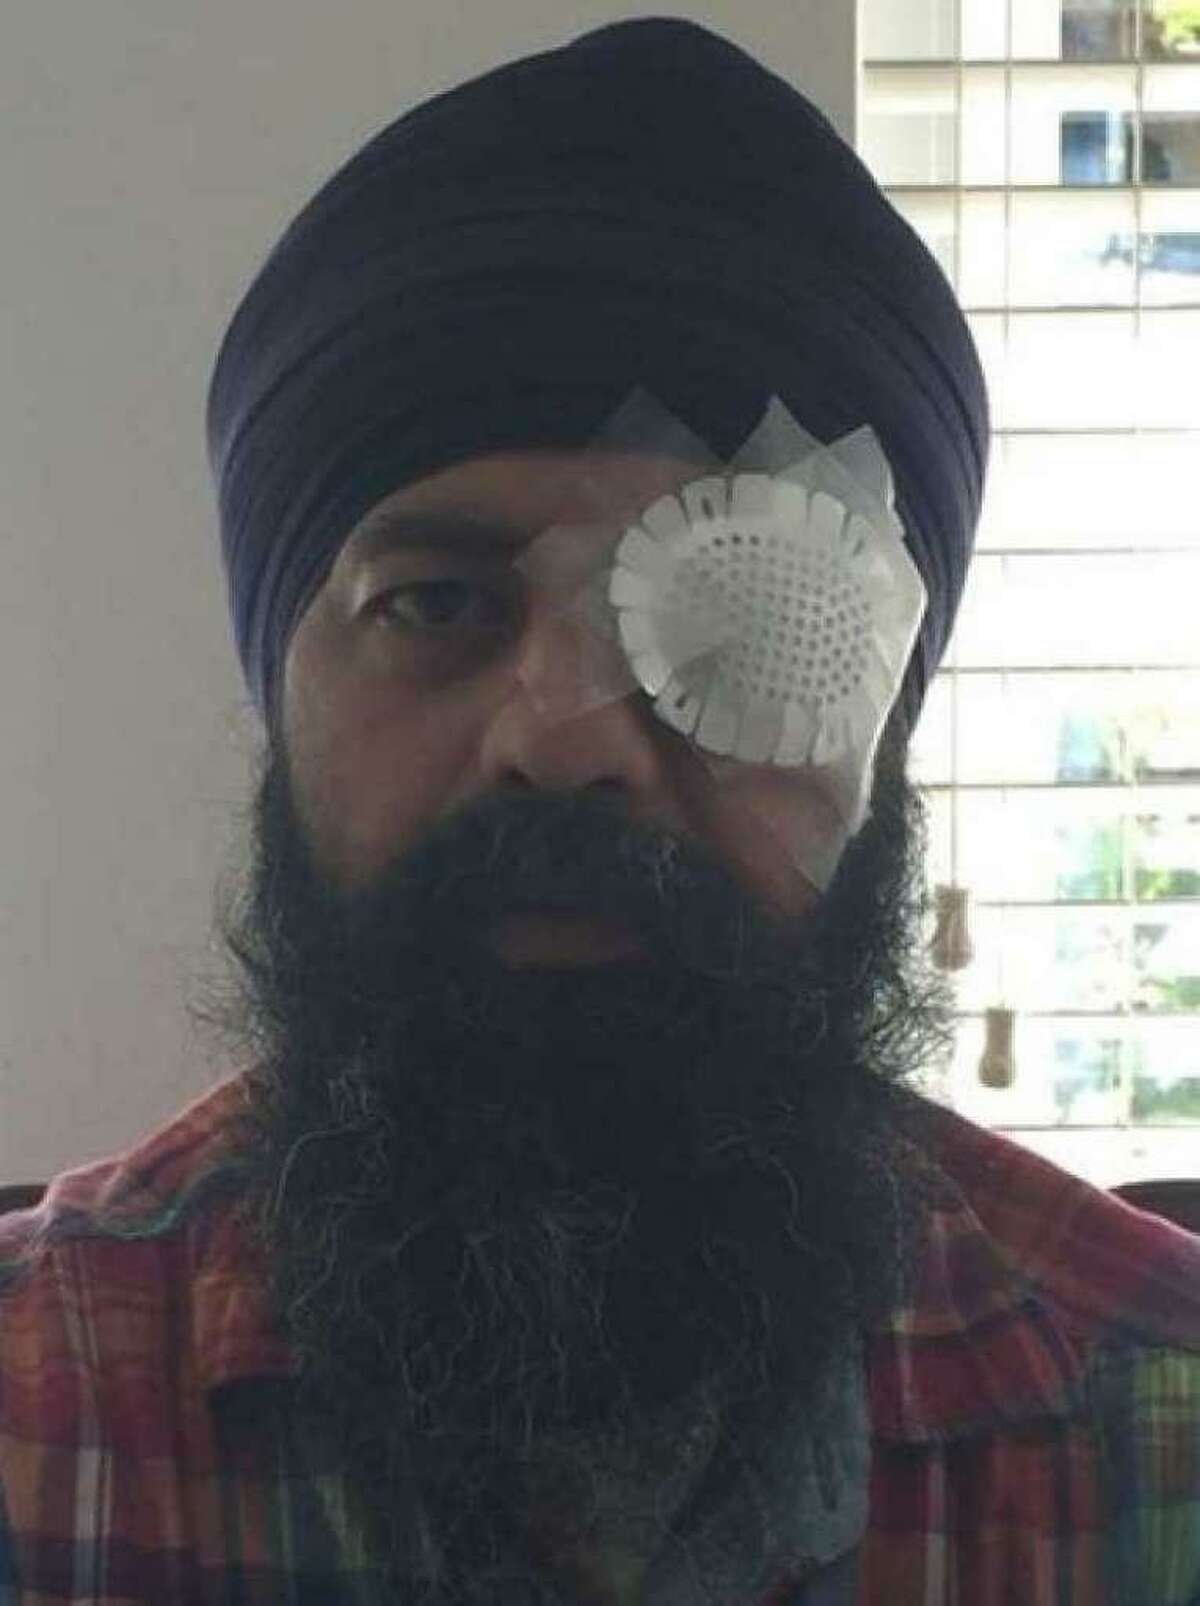 Maan Singh Khalsa, 41, was attacked by a group of men in Richmond last month. Khalsa said the man cut his hair in the assault, which he keeps unshorn as a part of his Sikh religion.